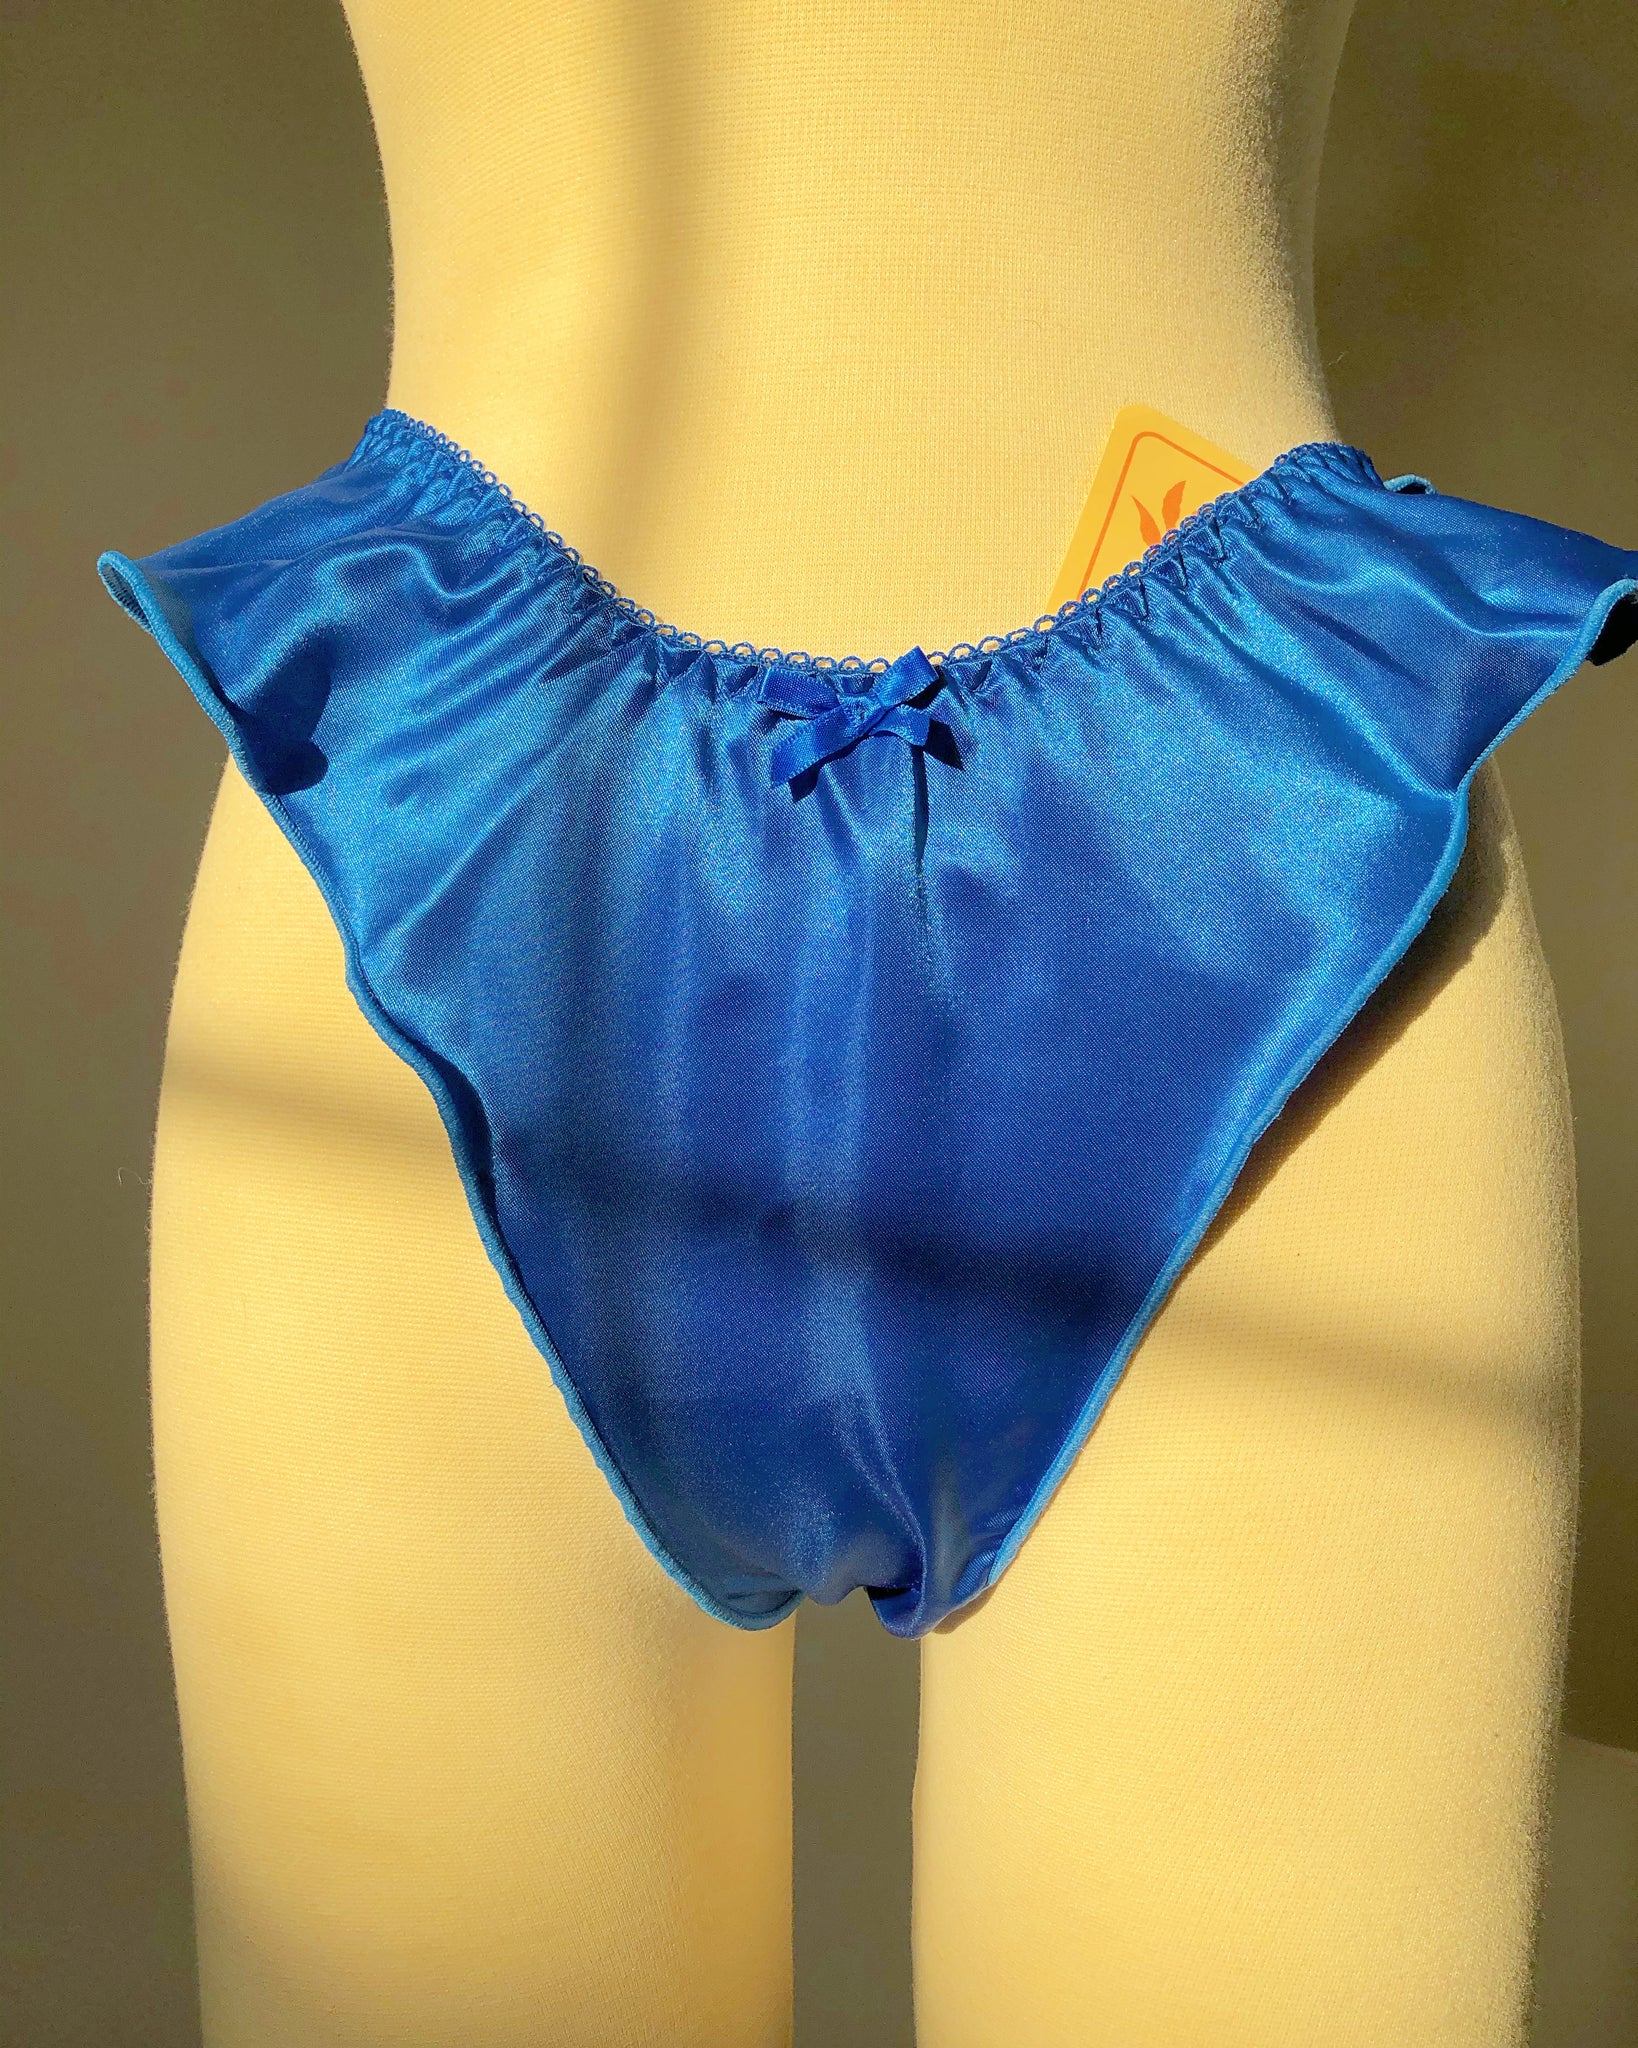 Vintage Blue Bloomer Panties, fits 24 inch waist, Small, Acetate